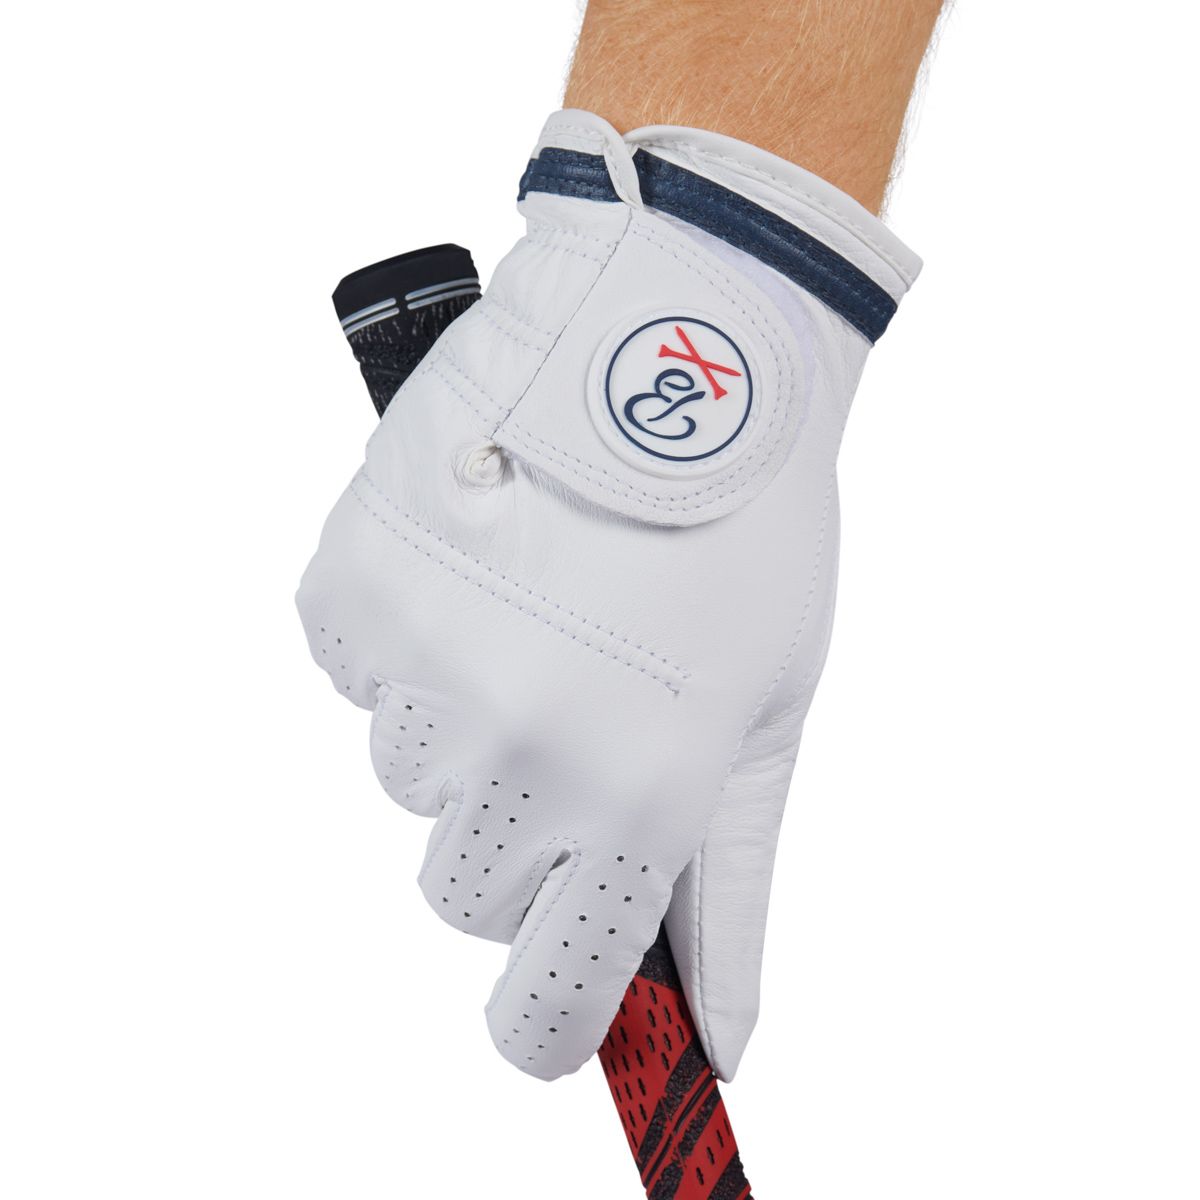 Barstool Golf Glove-Golf Accessories-Fore Play-Barstool Sports